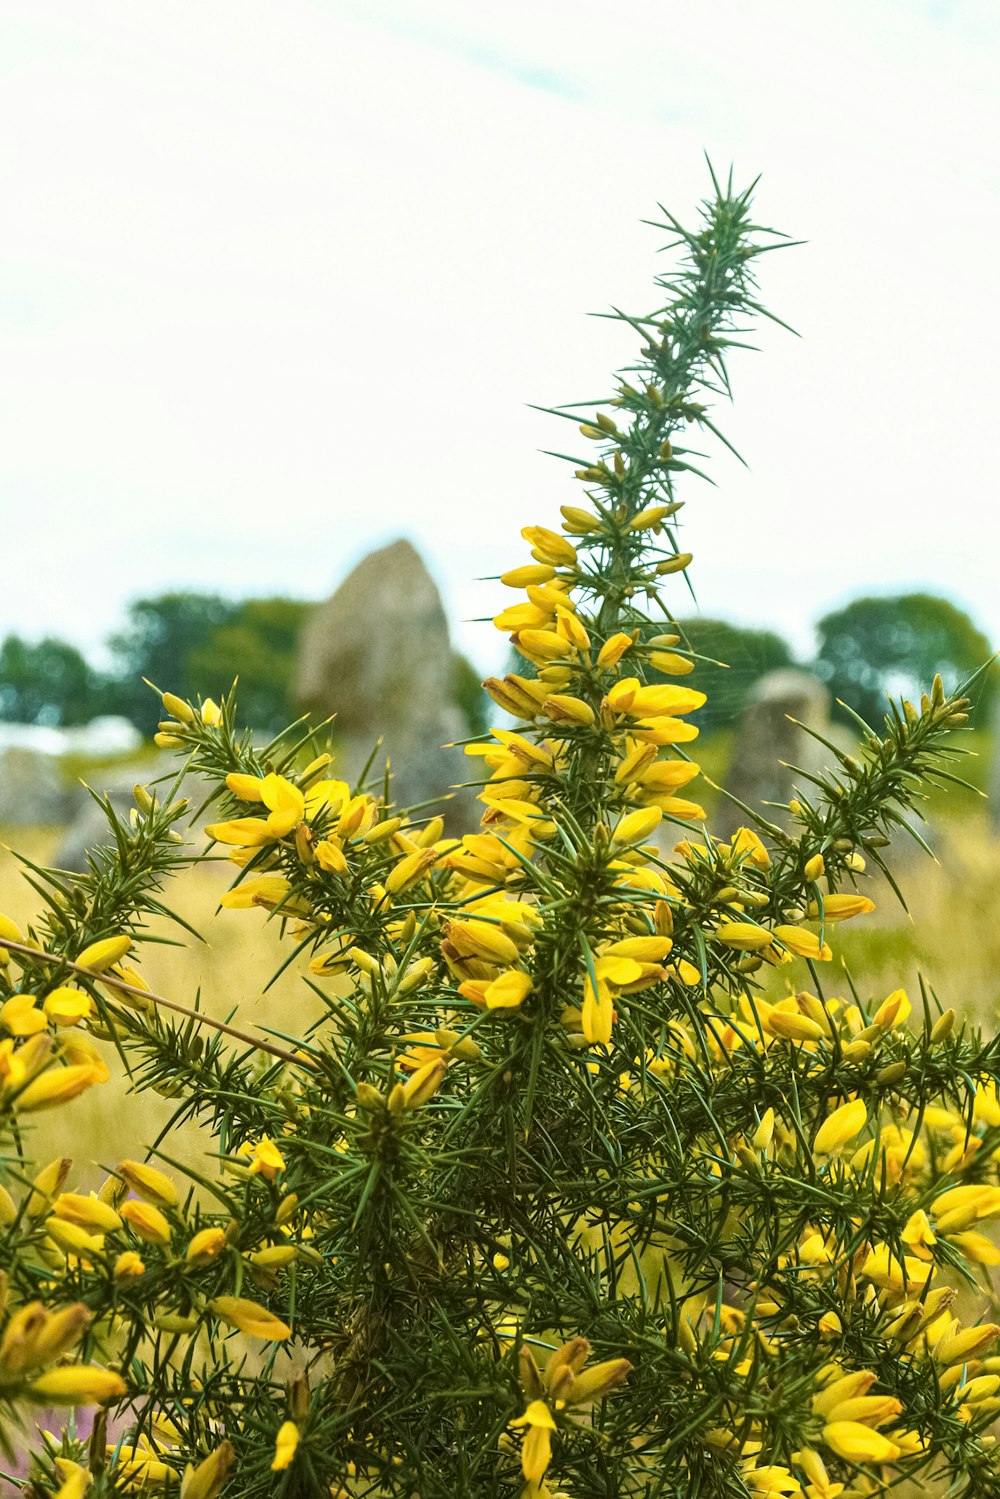 a plant with yellow flowers in a field